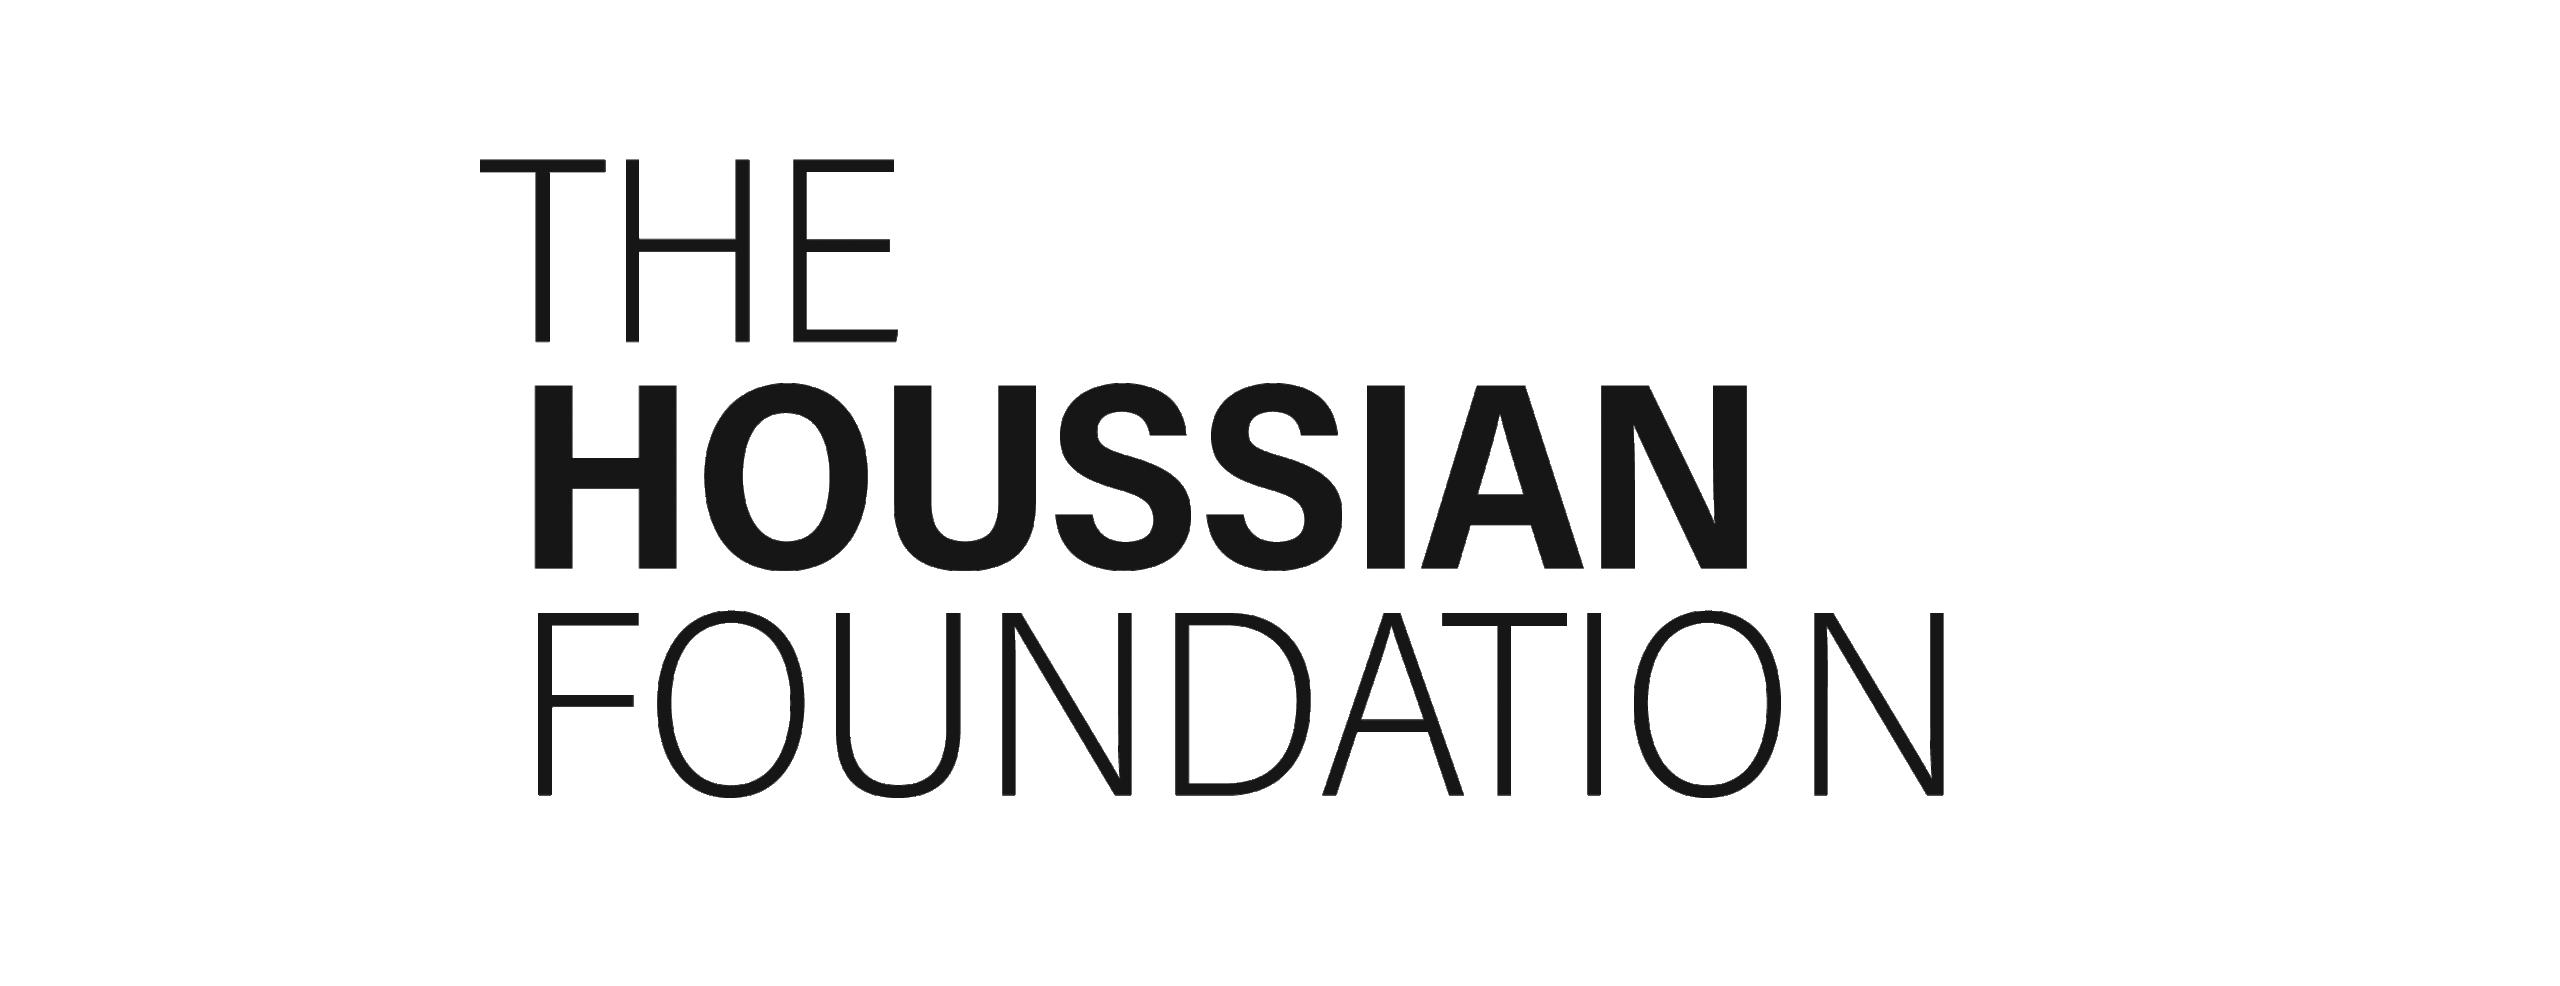 The Houssian Foundation